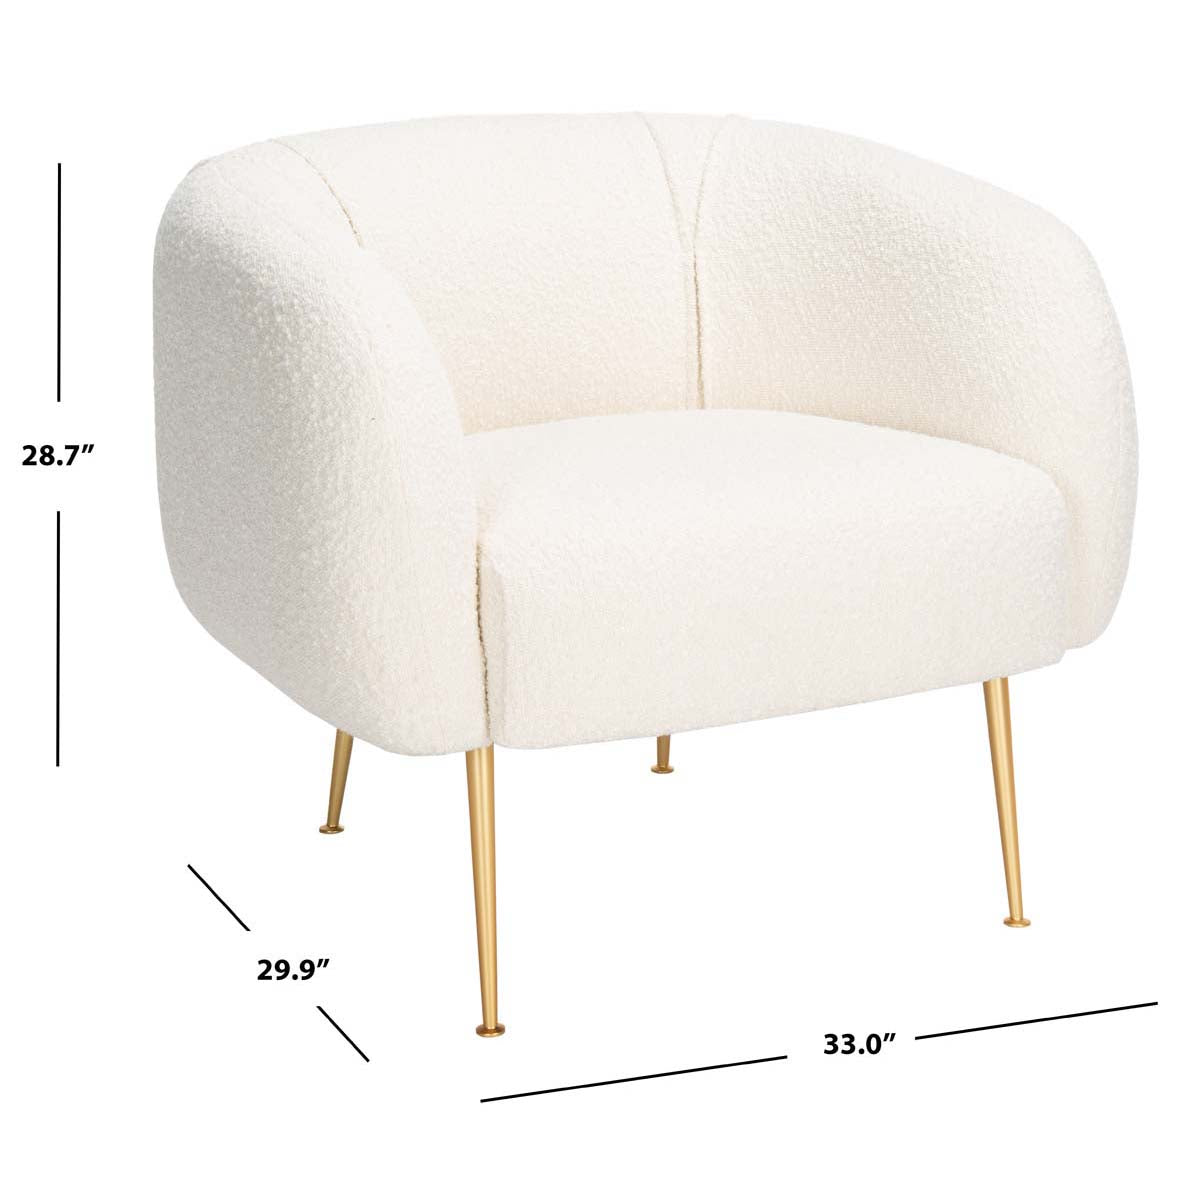 Safavieh Couture Alena Accent Chair - Ivory / Gold